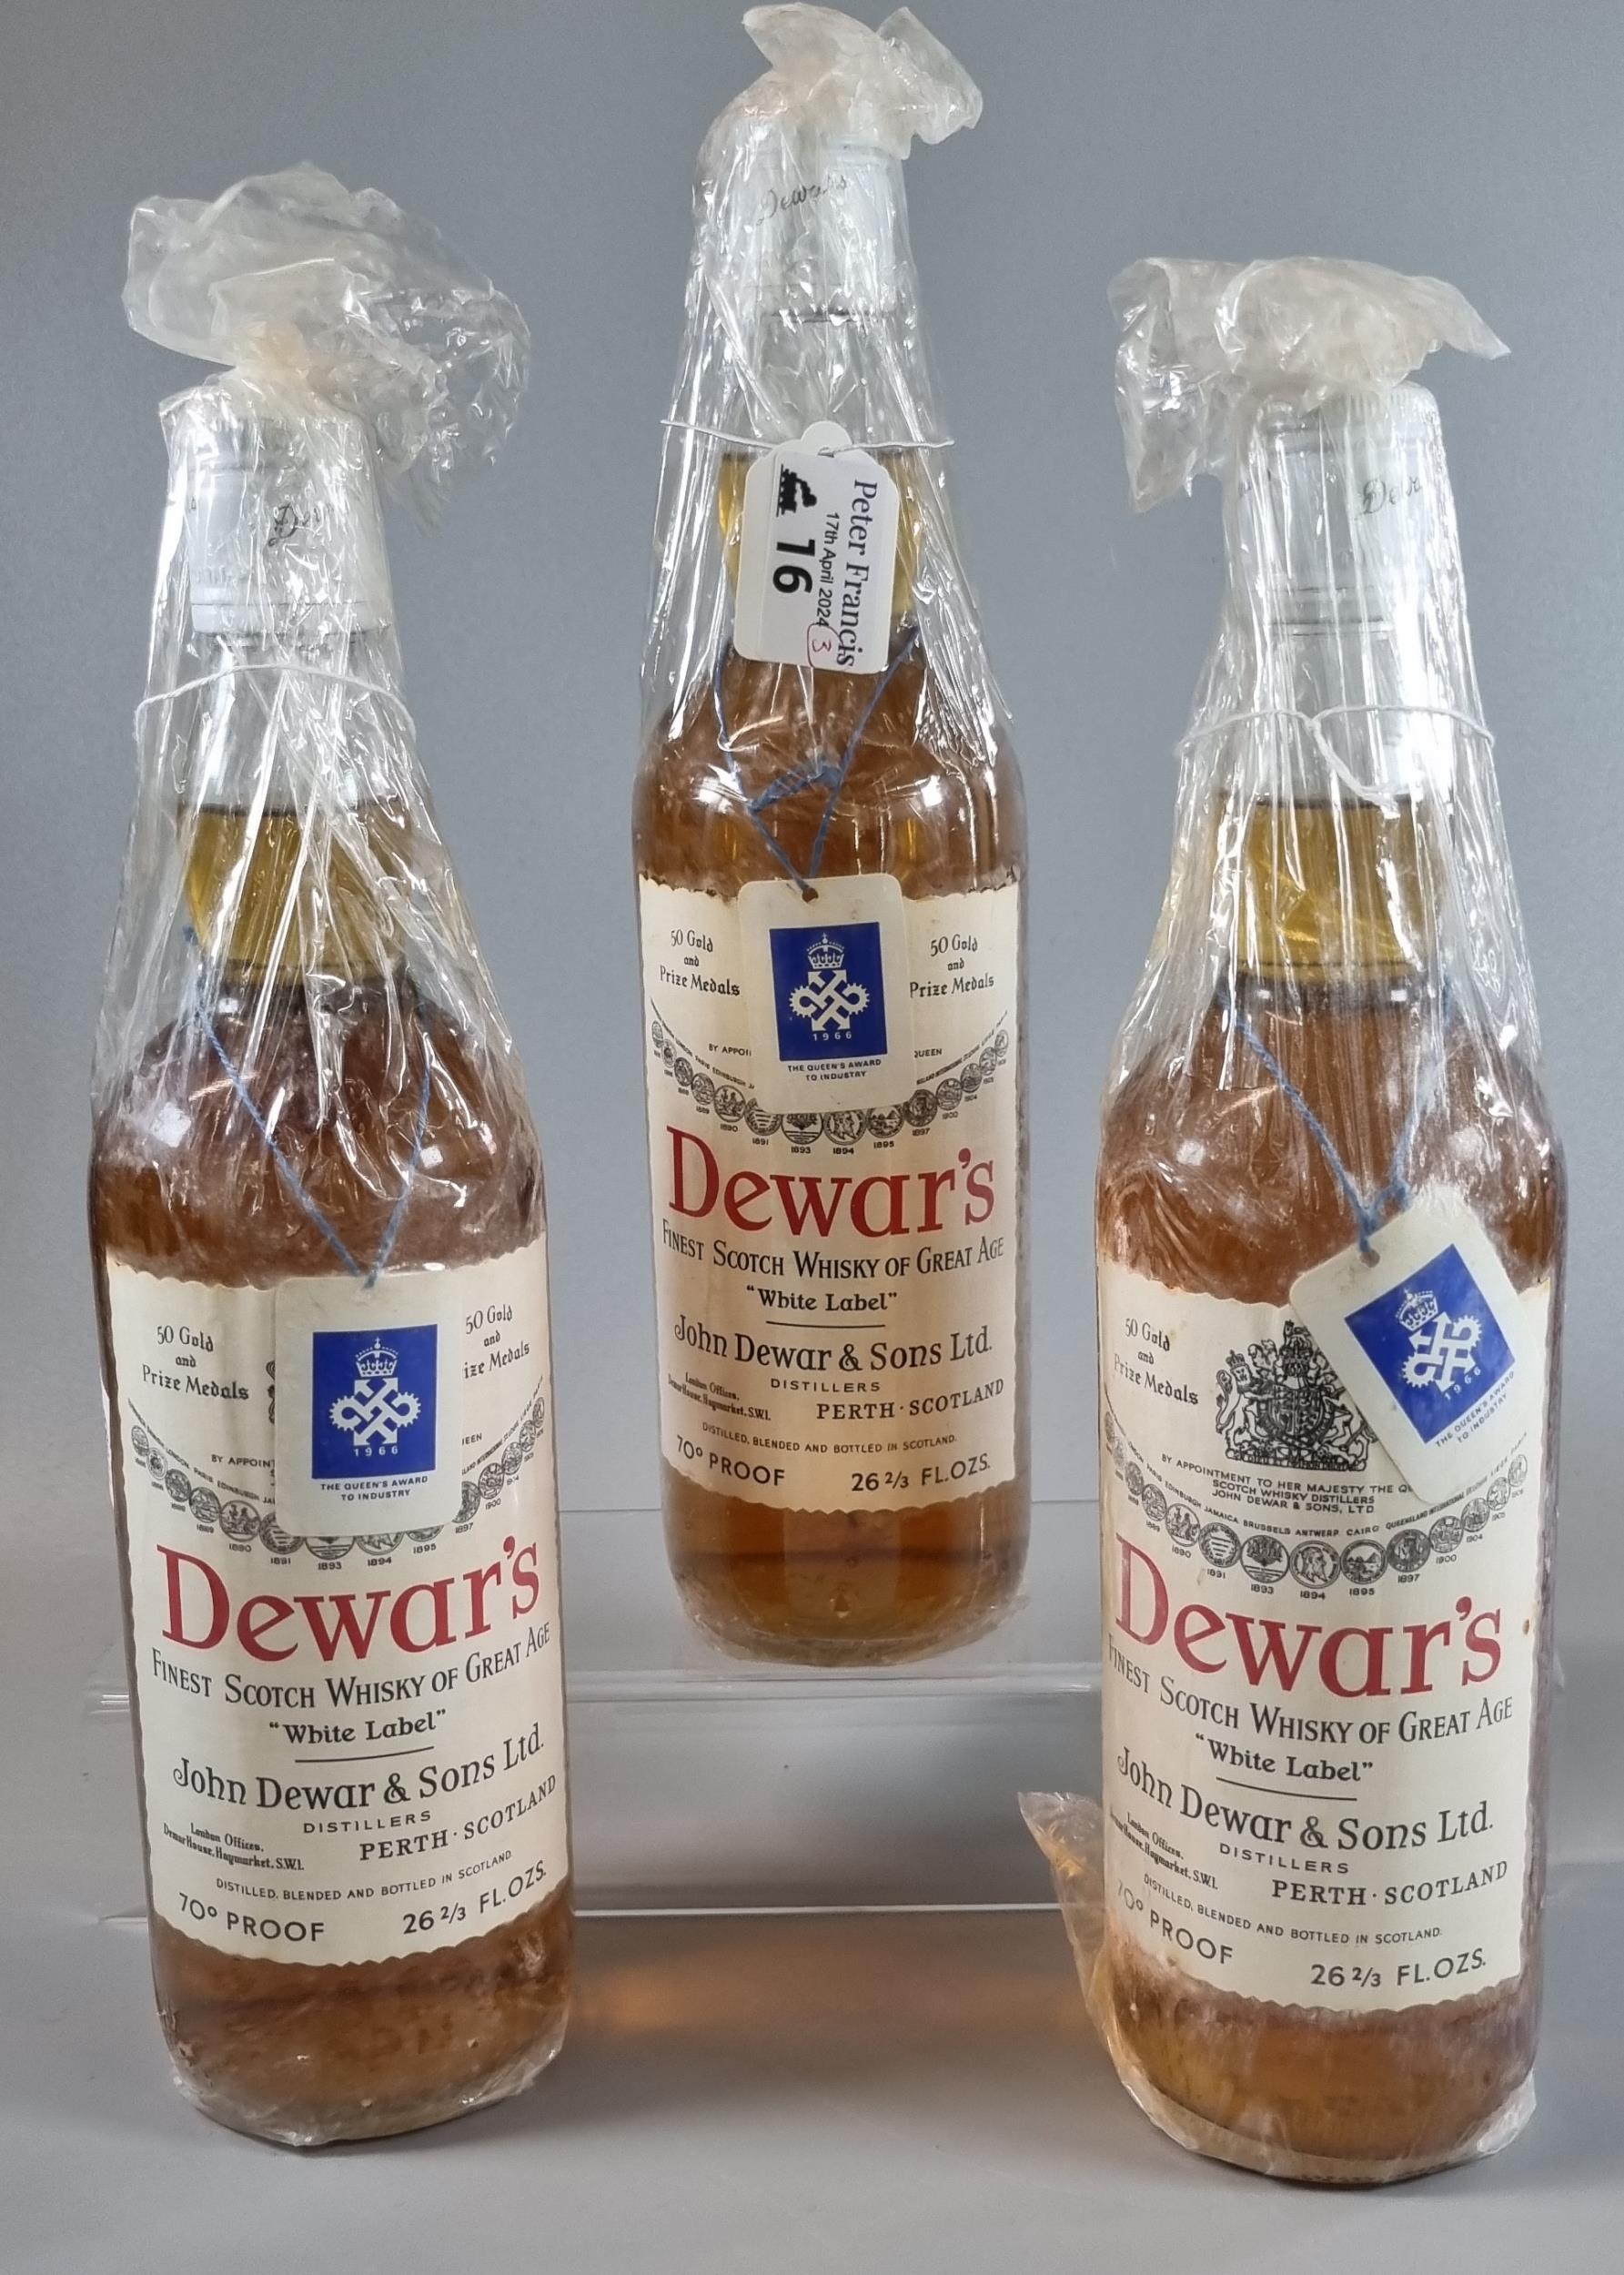 Three bottles of vintage Dewar's Finest Scotch Whisky of Great Age, 'White Label'. 70% proof. 26 2/3